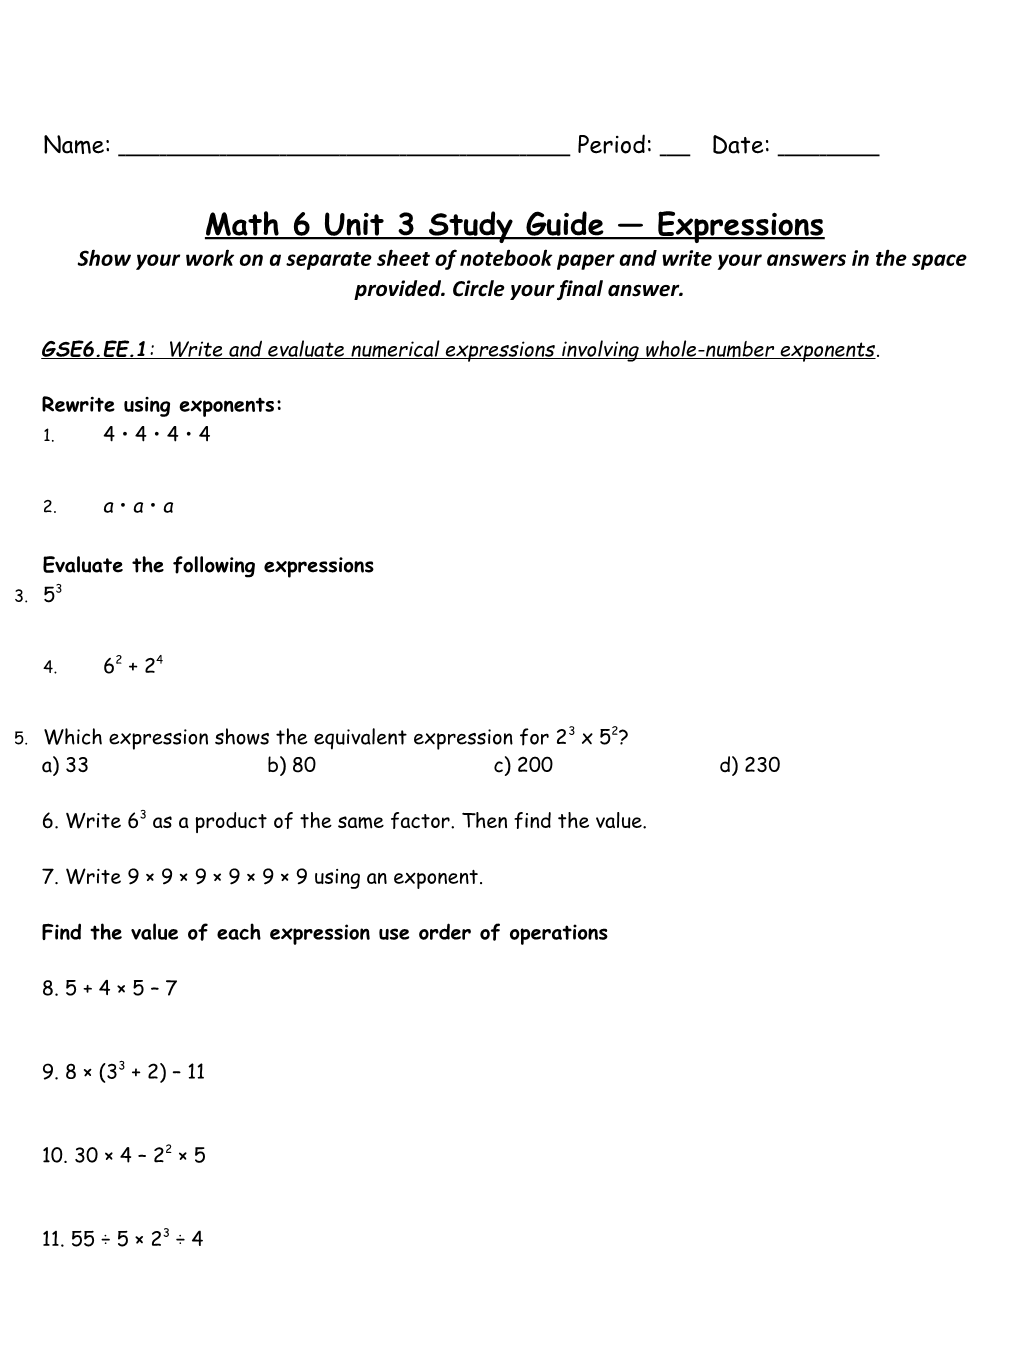 Math 6 Unit 3 Study Guide Expressions